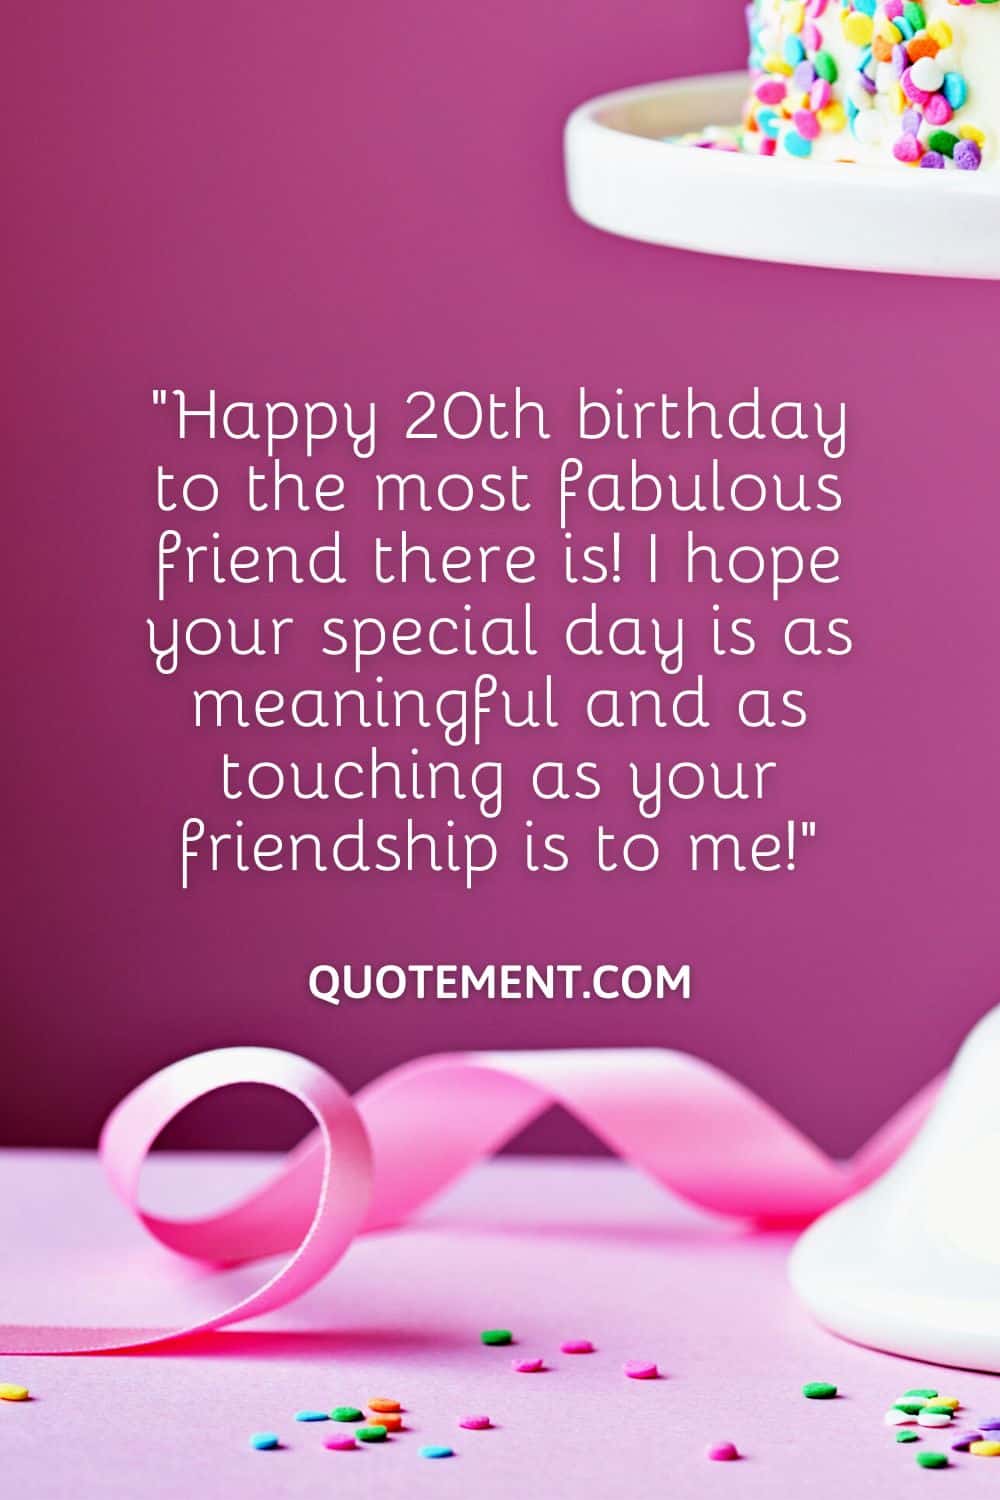 Here are 20 Happy Birthday quotes for your friends and family - India Today